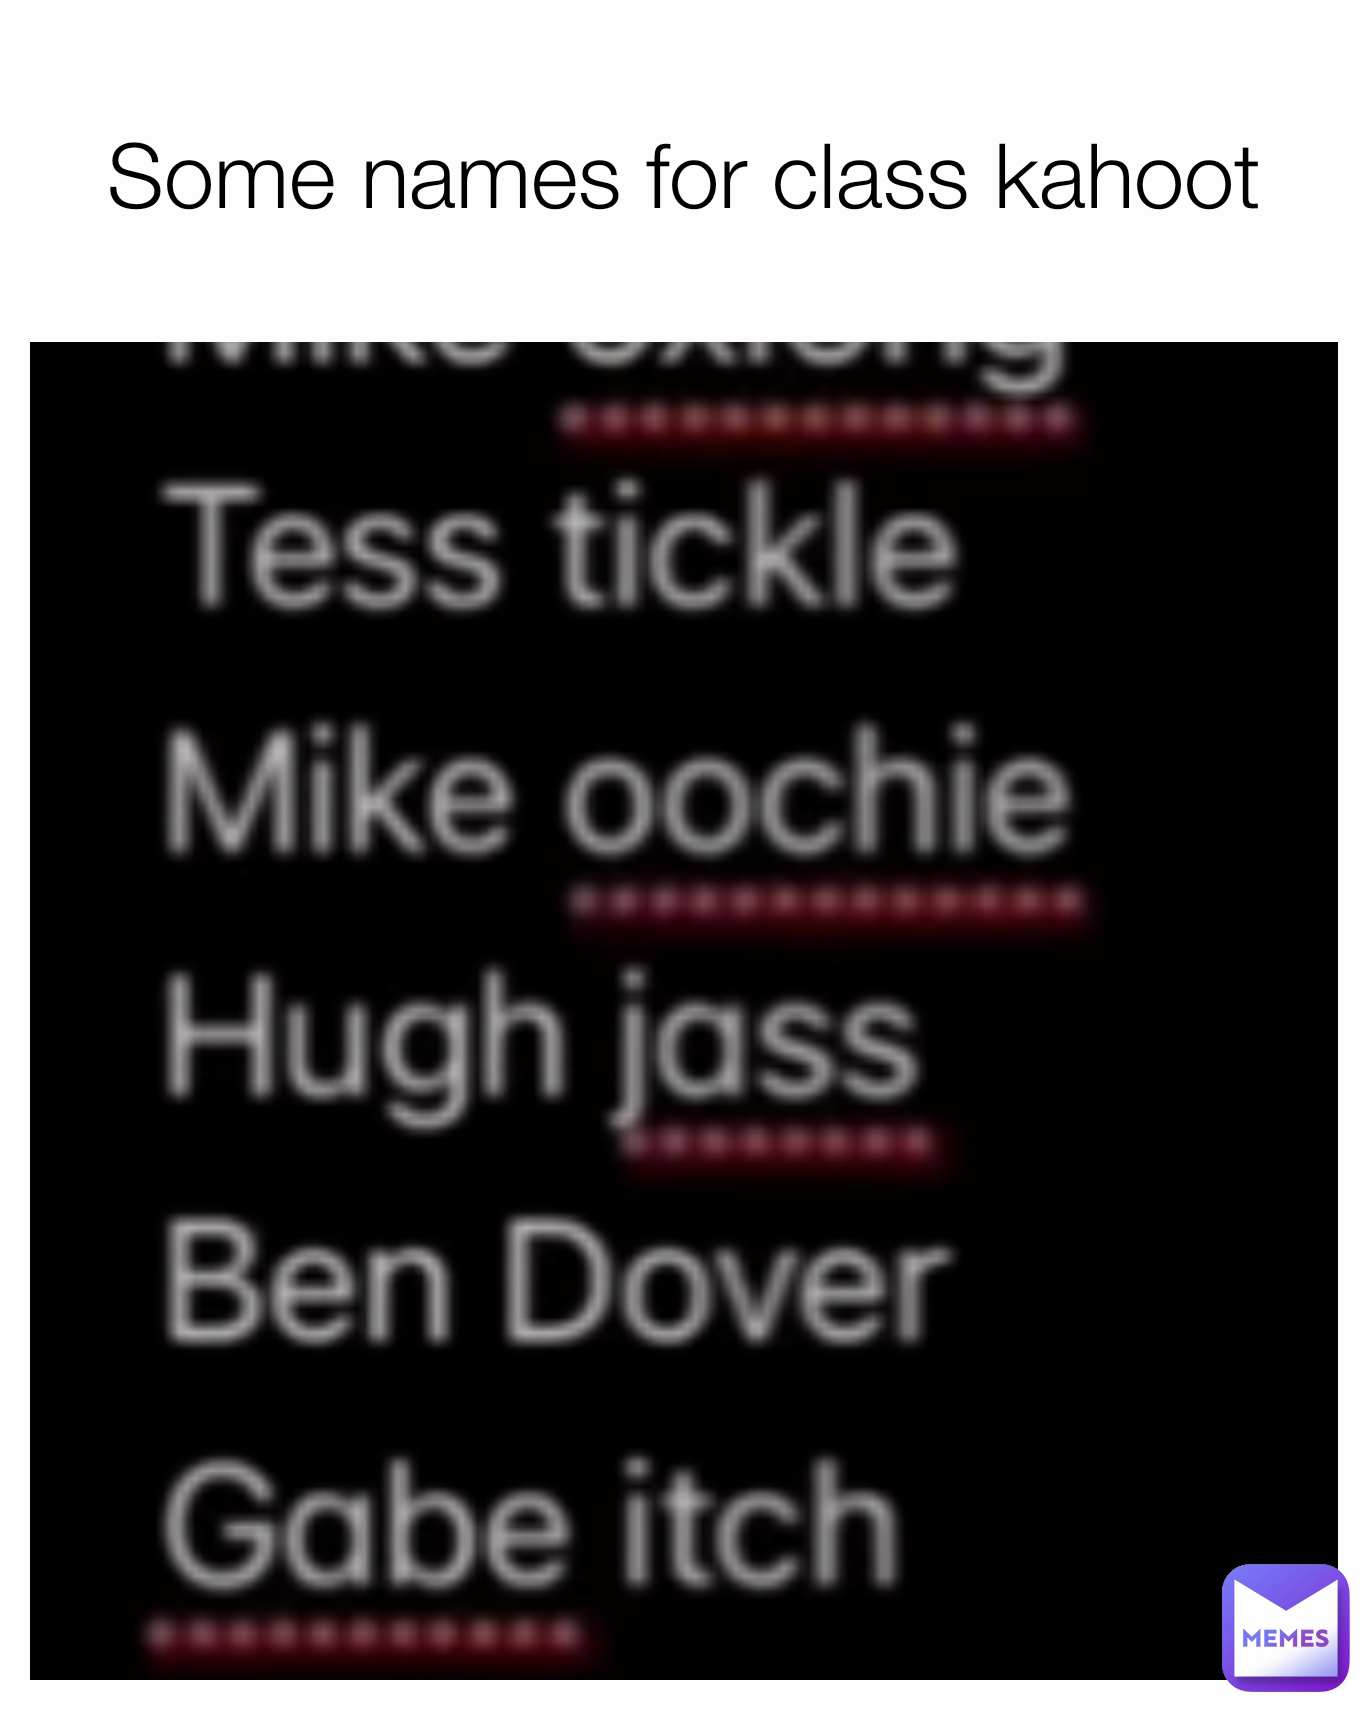 Some names for class kahoot